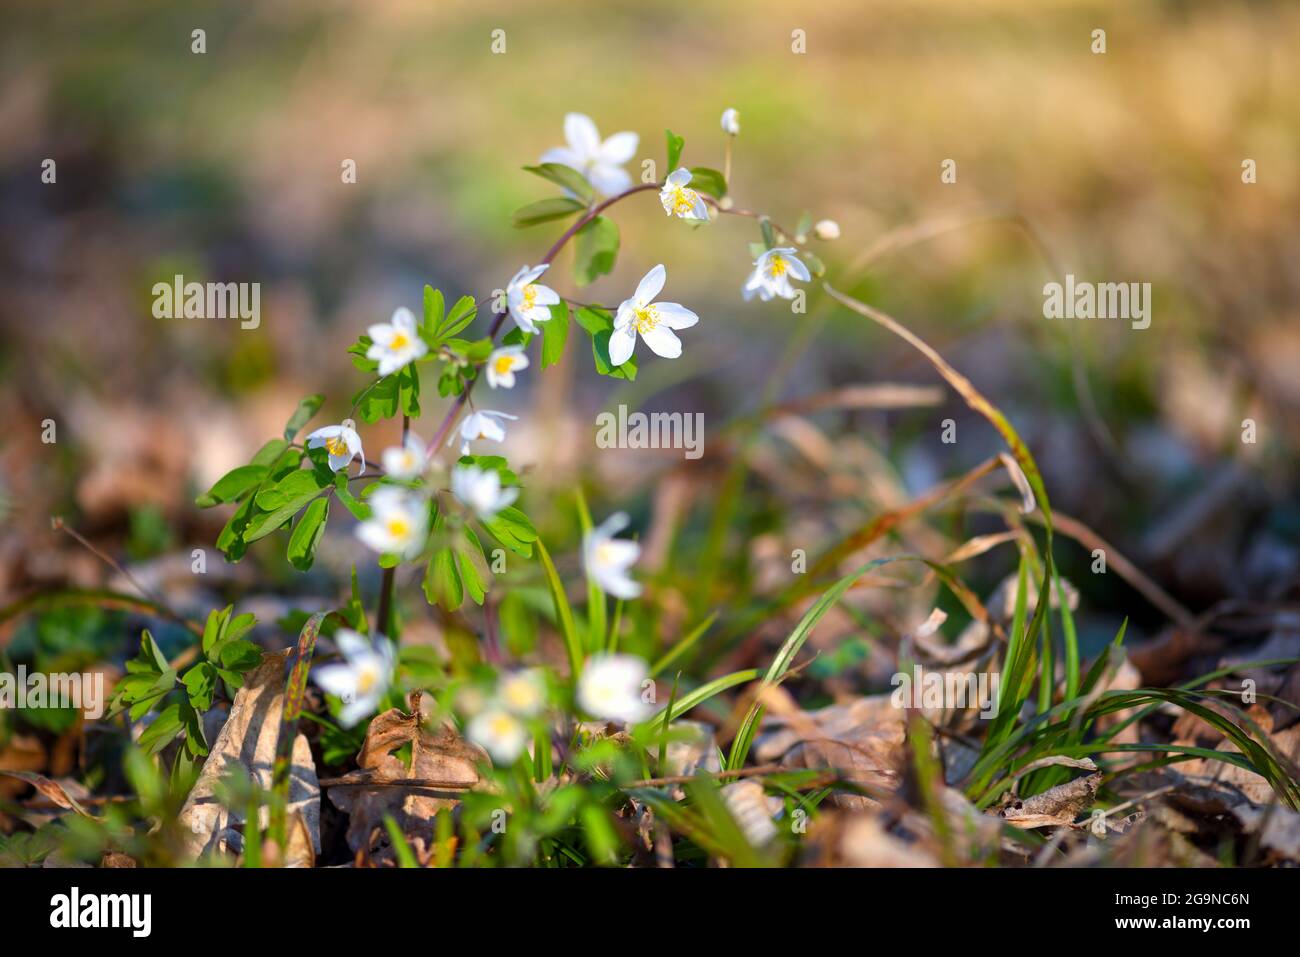 Spring flower close-up. Isopyrum thalictroides. Stock Photo